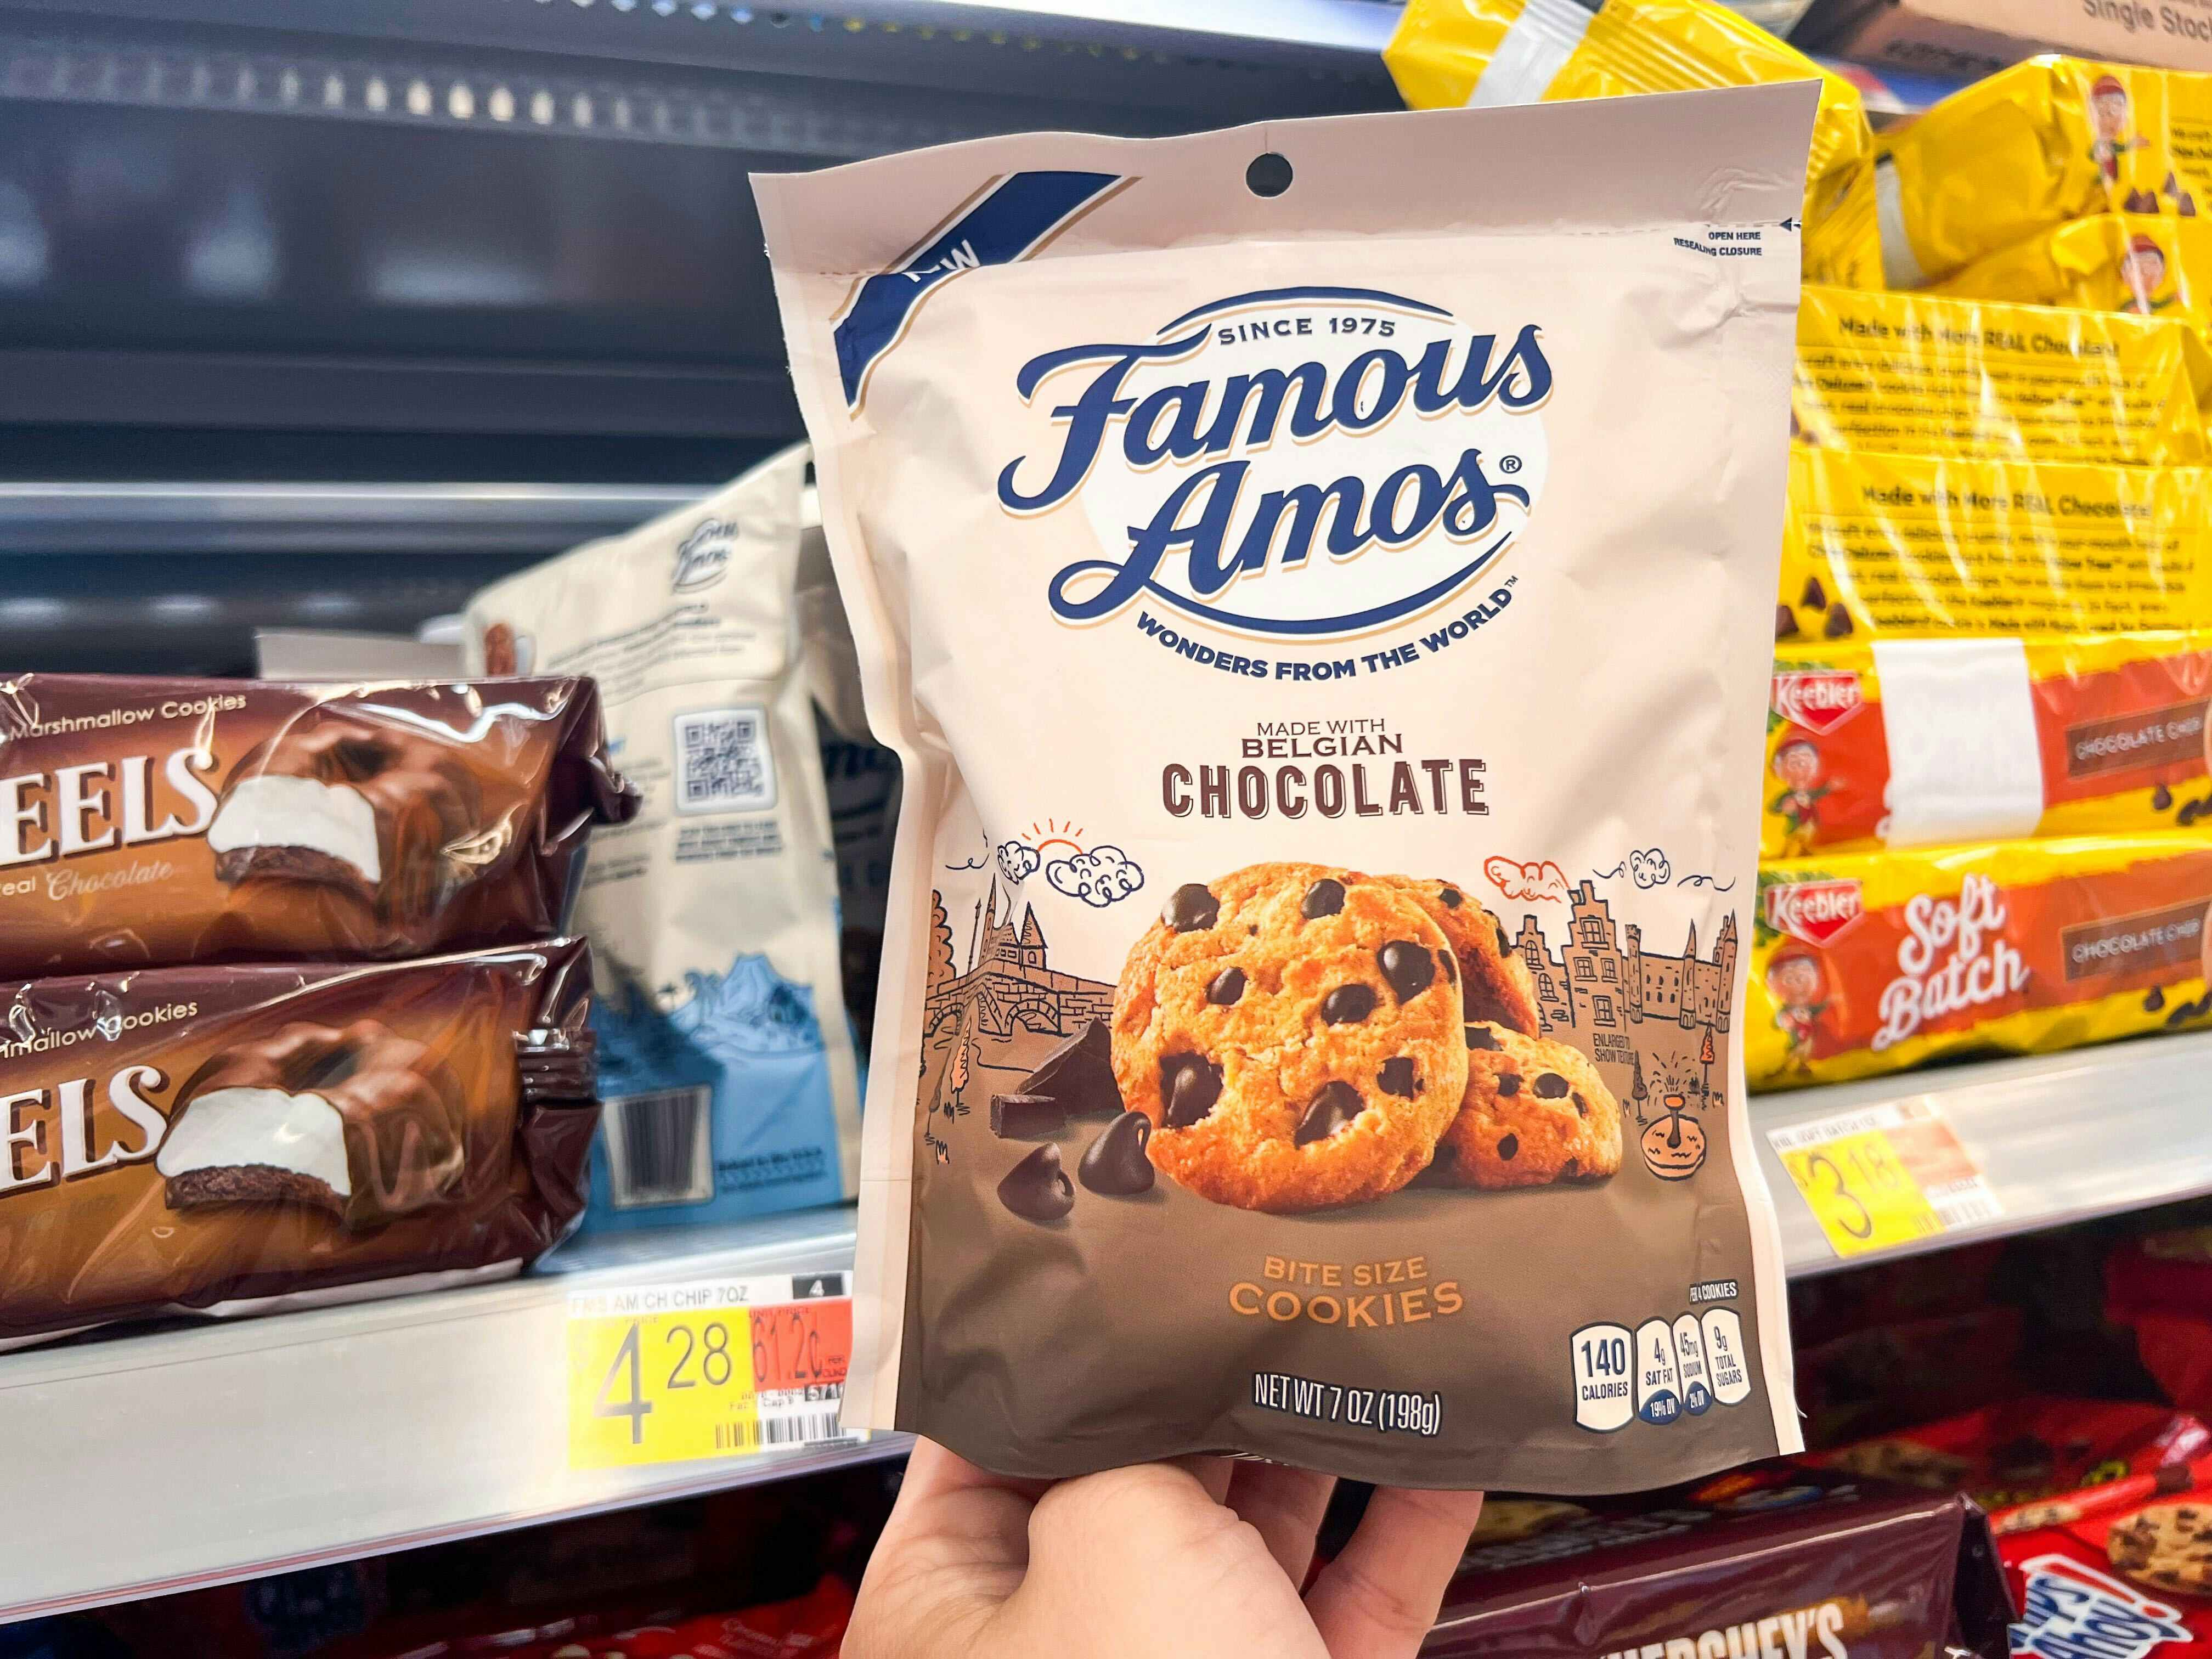 Hand holding a seven-ounce package of Famous Amos Cookies at Walmart